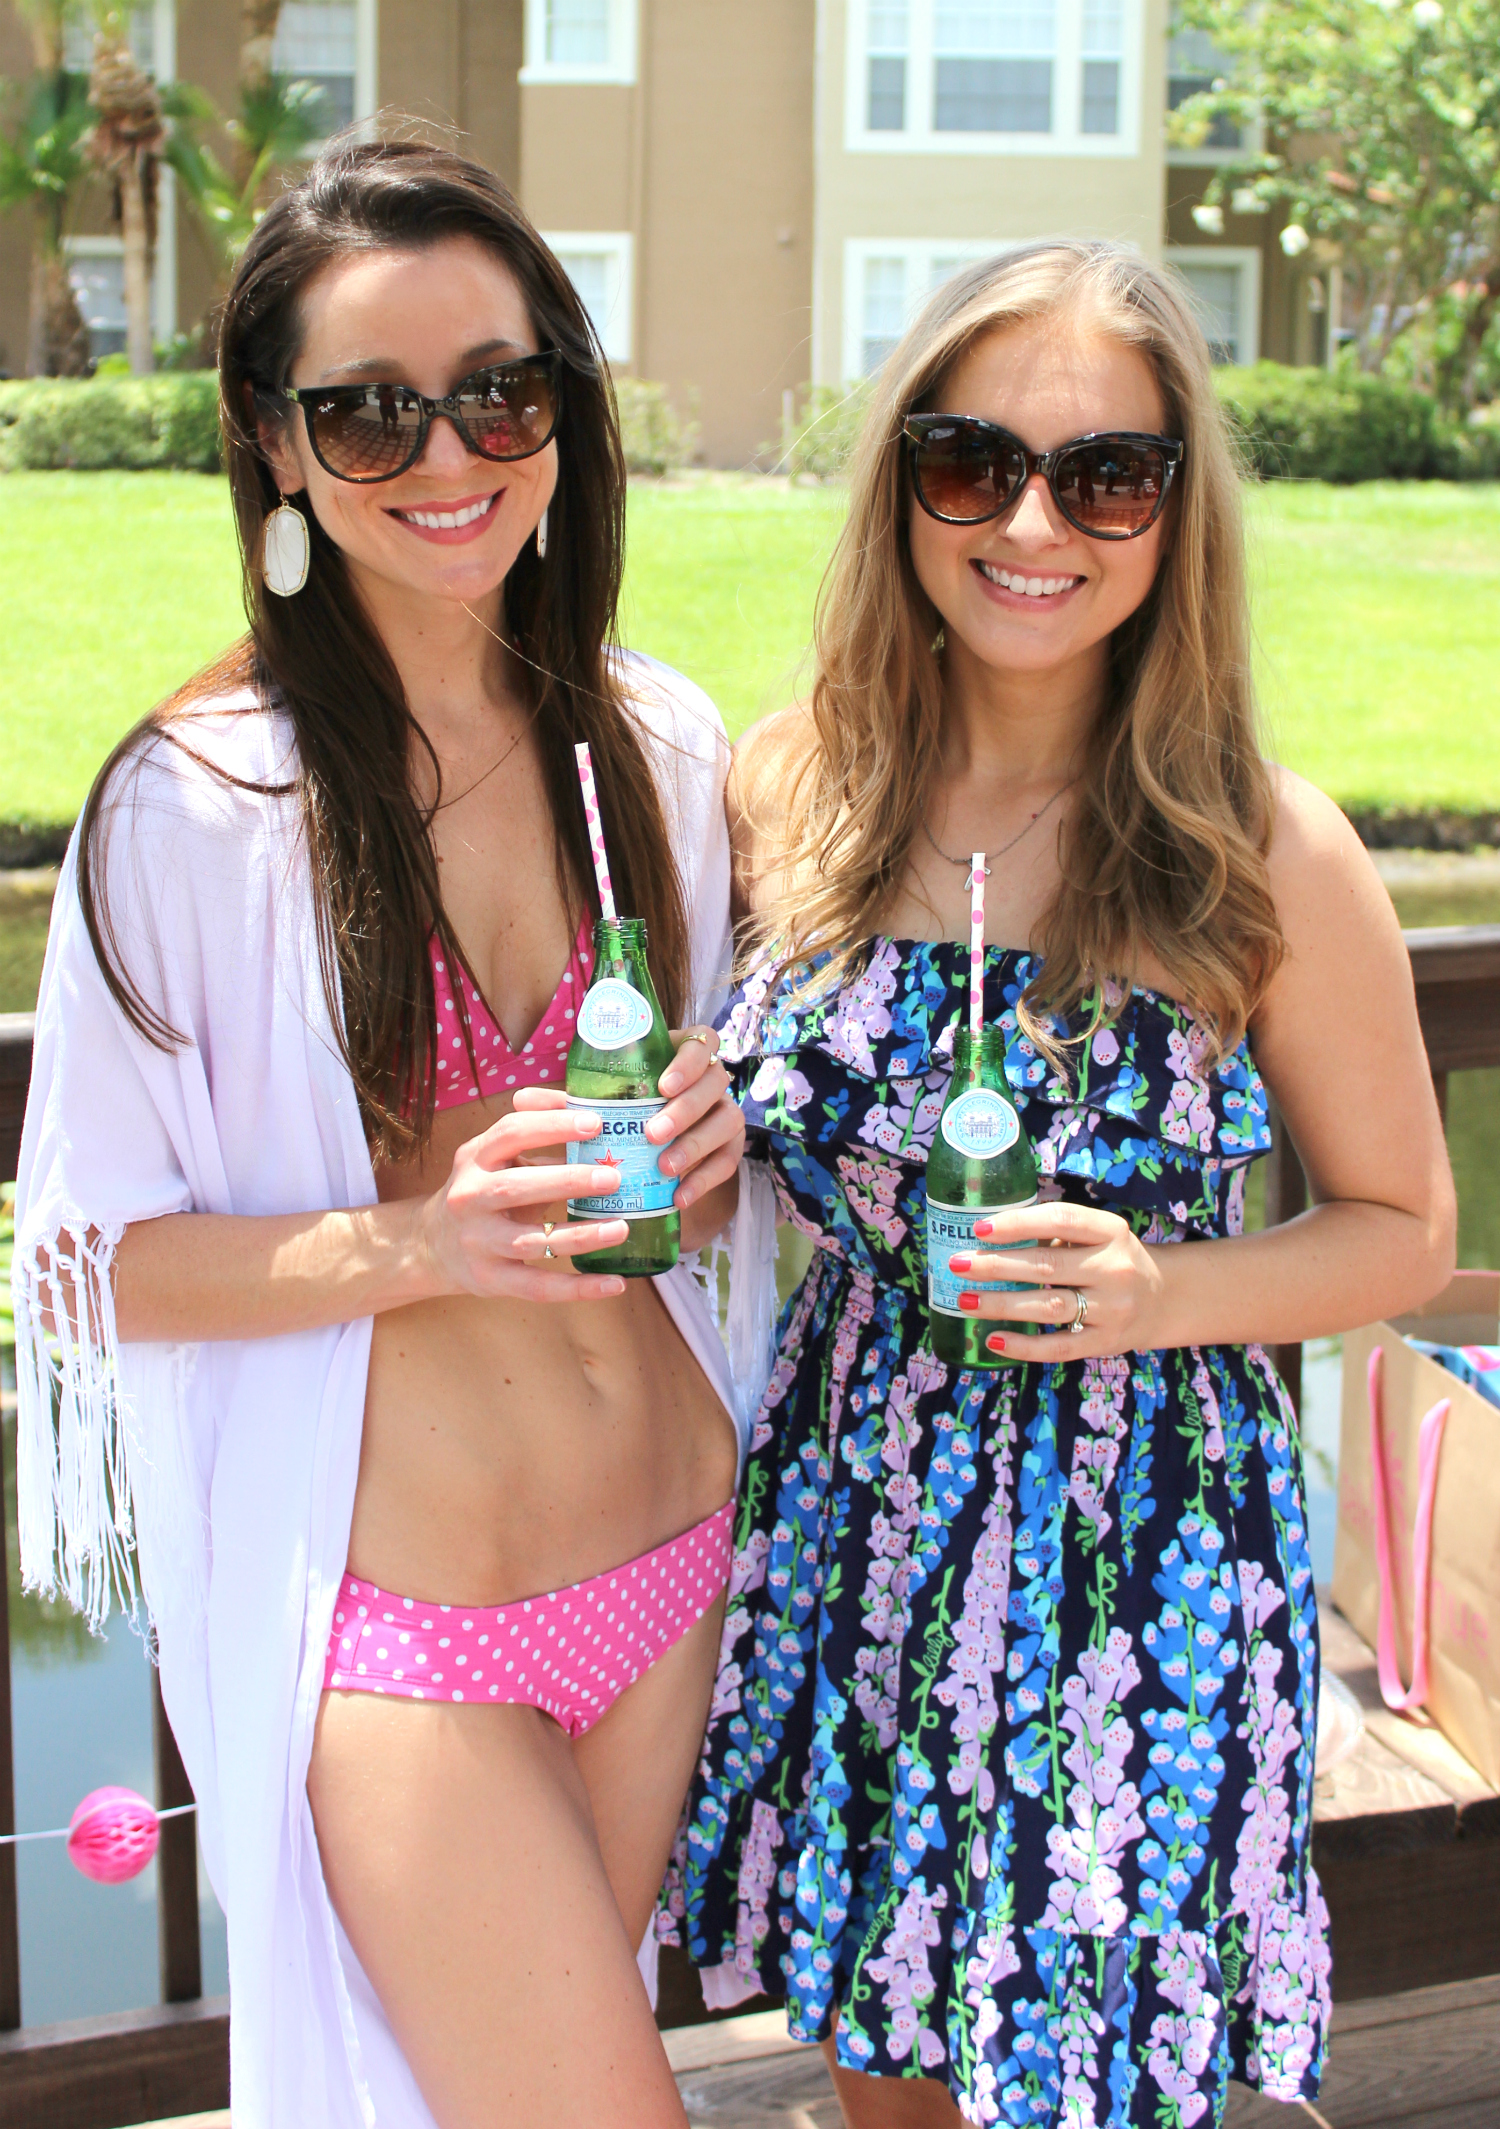 Cute summer pool party ideas for adults